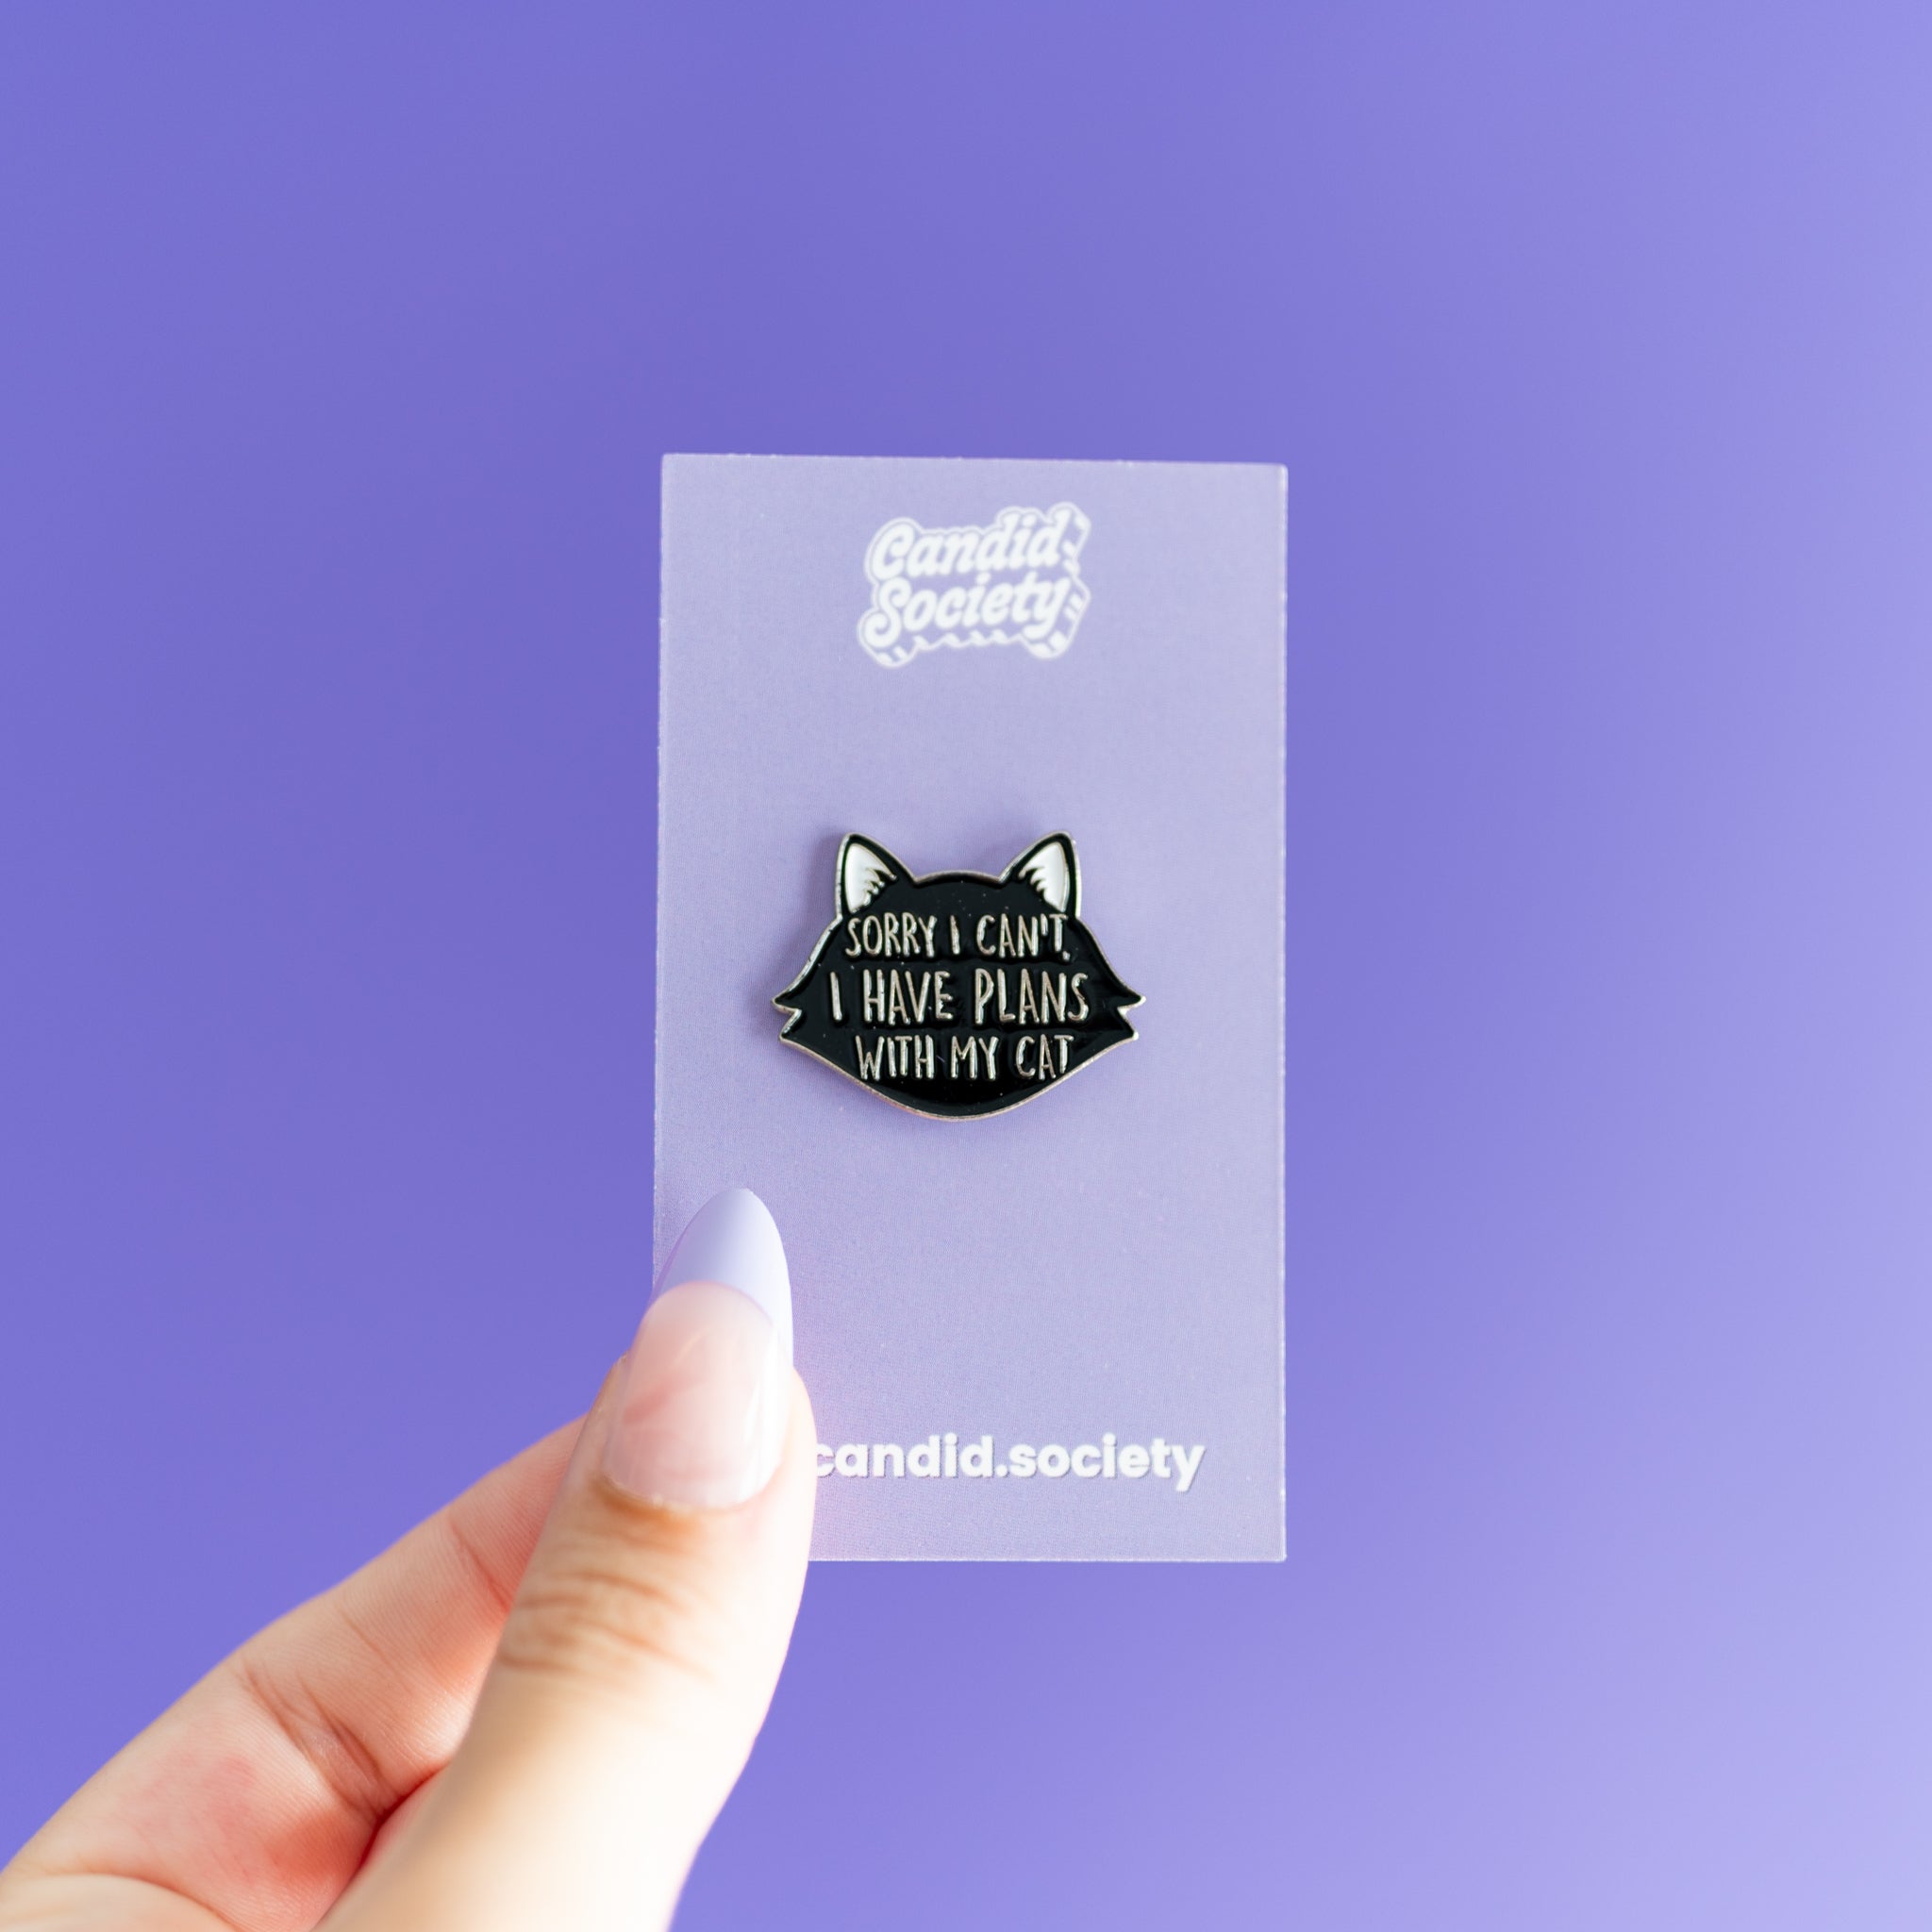 SORRY I CAN'T, I HAVE PLANS WITH MY CAT - Enamel Pin